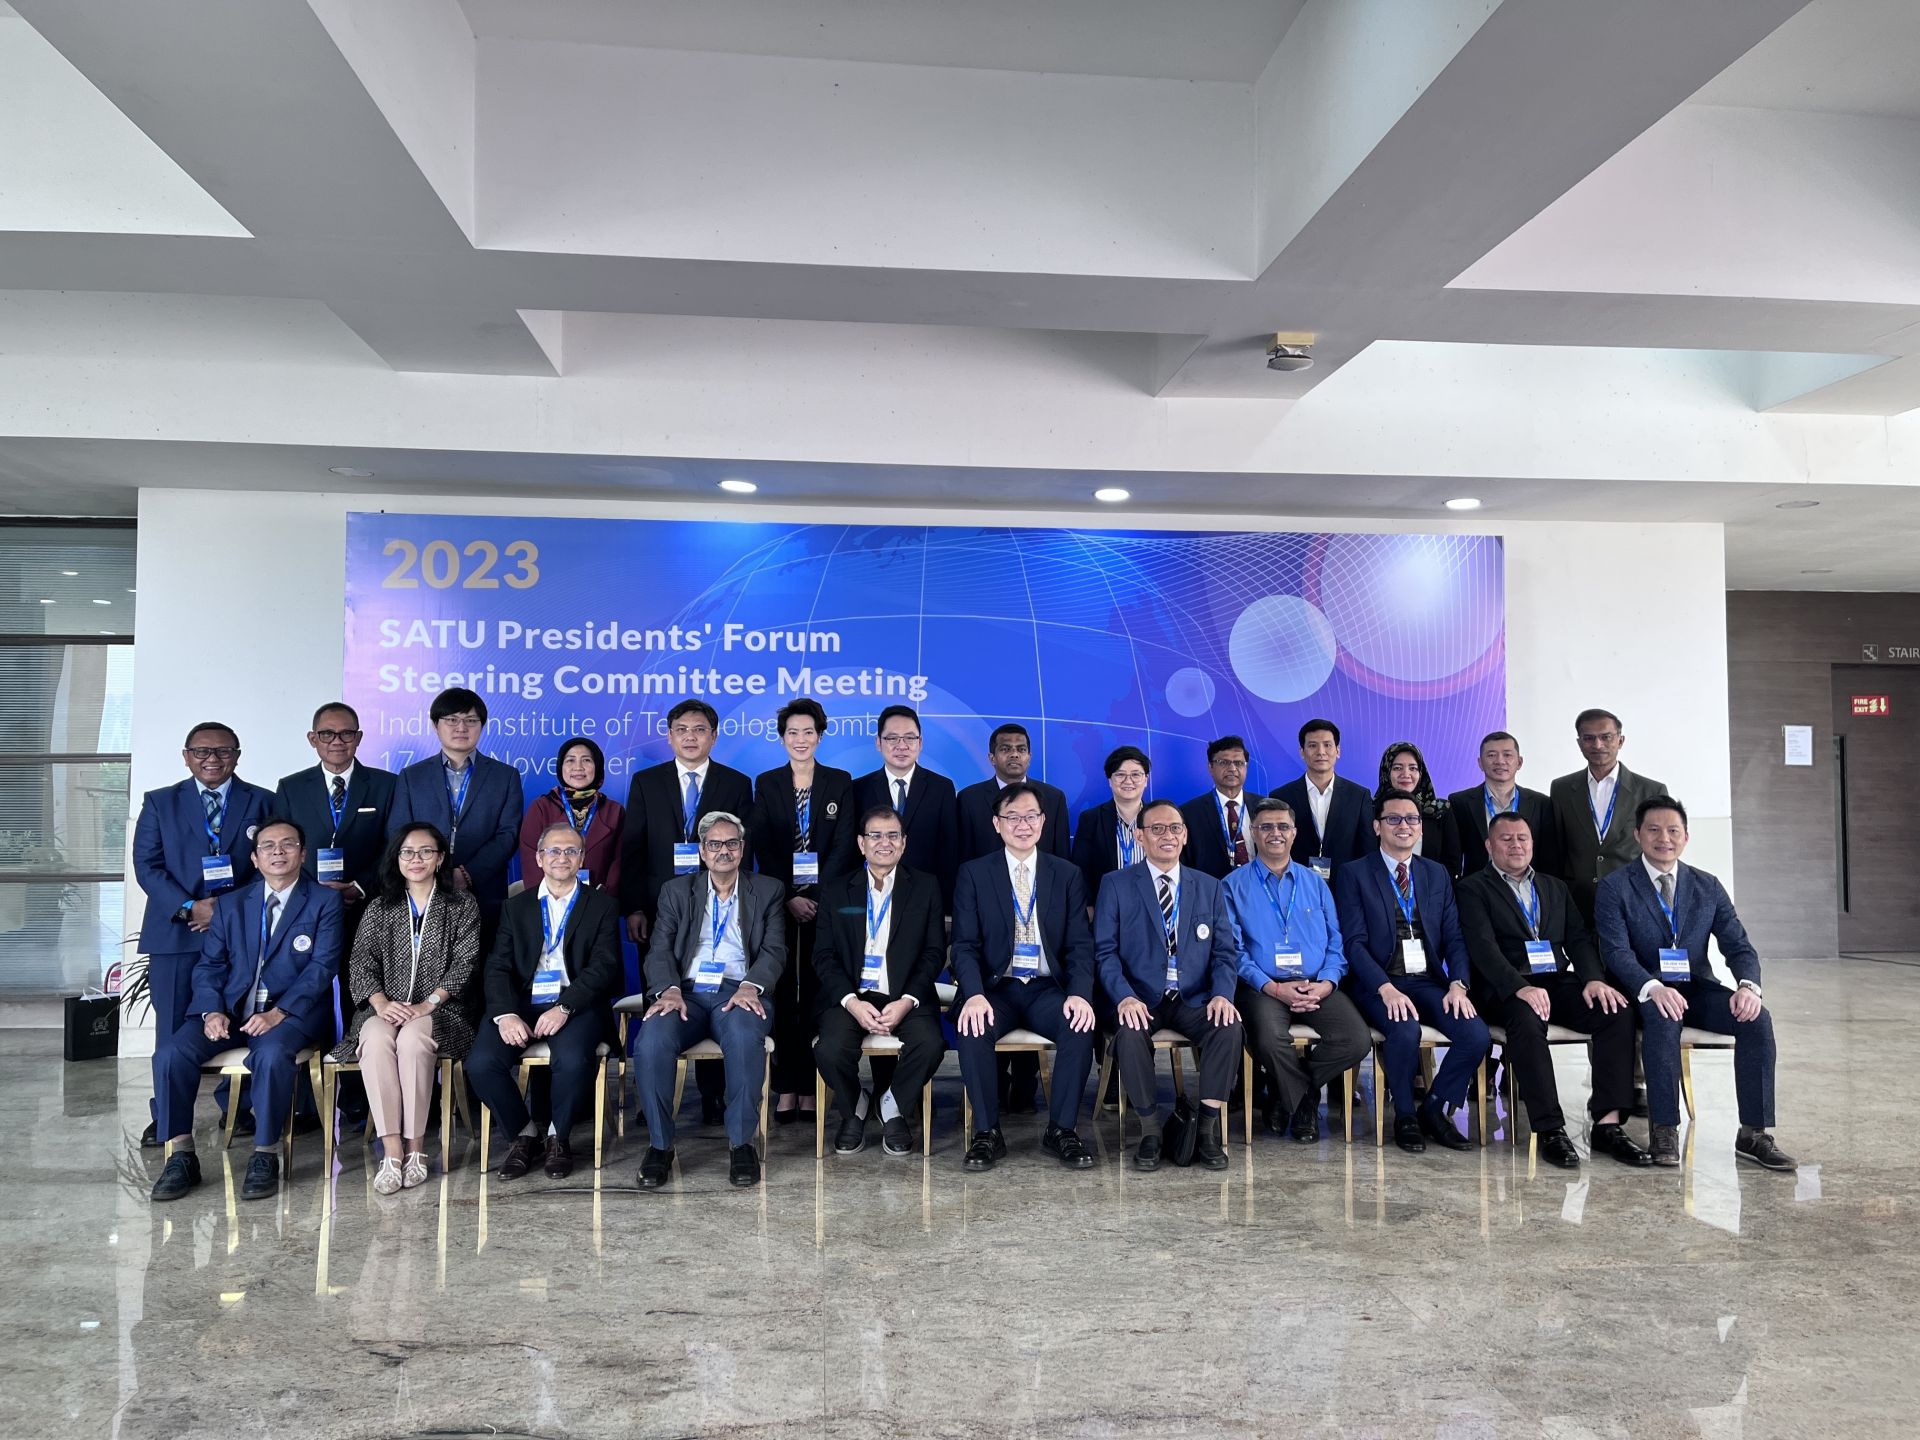 The 2023 SATU Presidents' Forum held its Steering Committee Meeting in India on November 17th to 18th